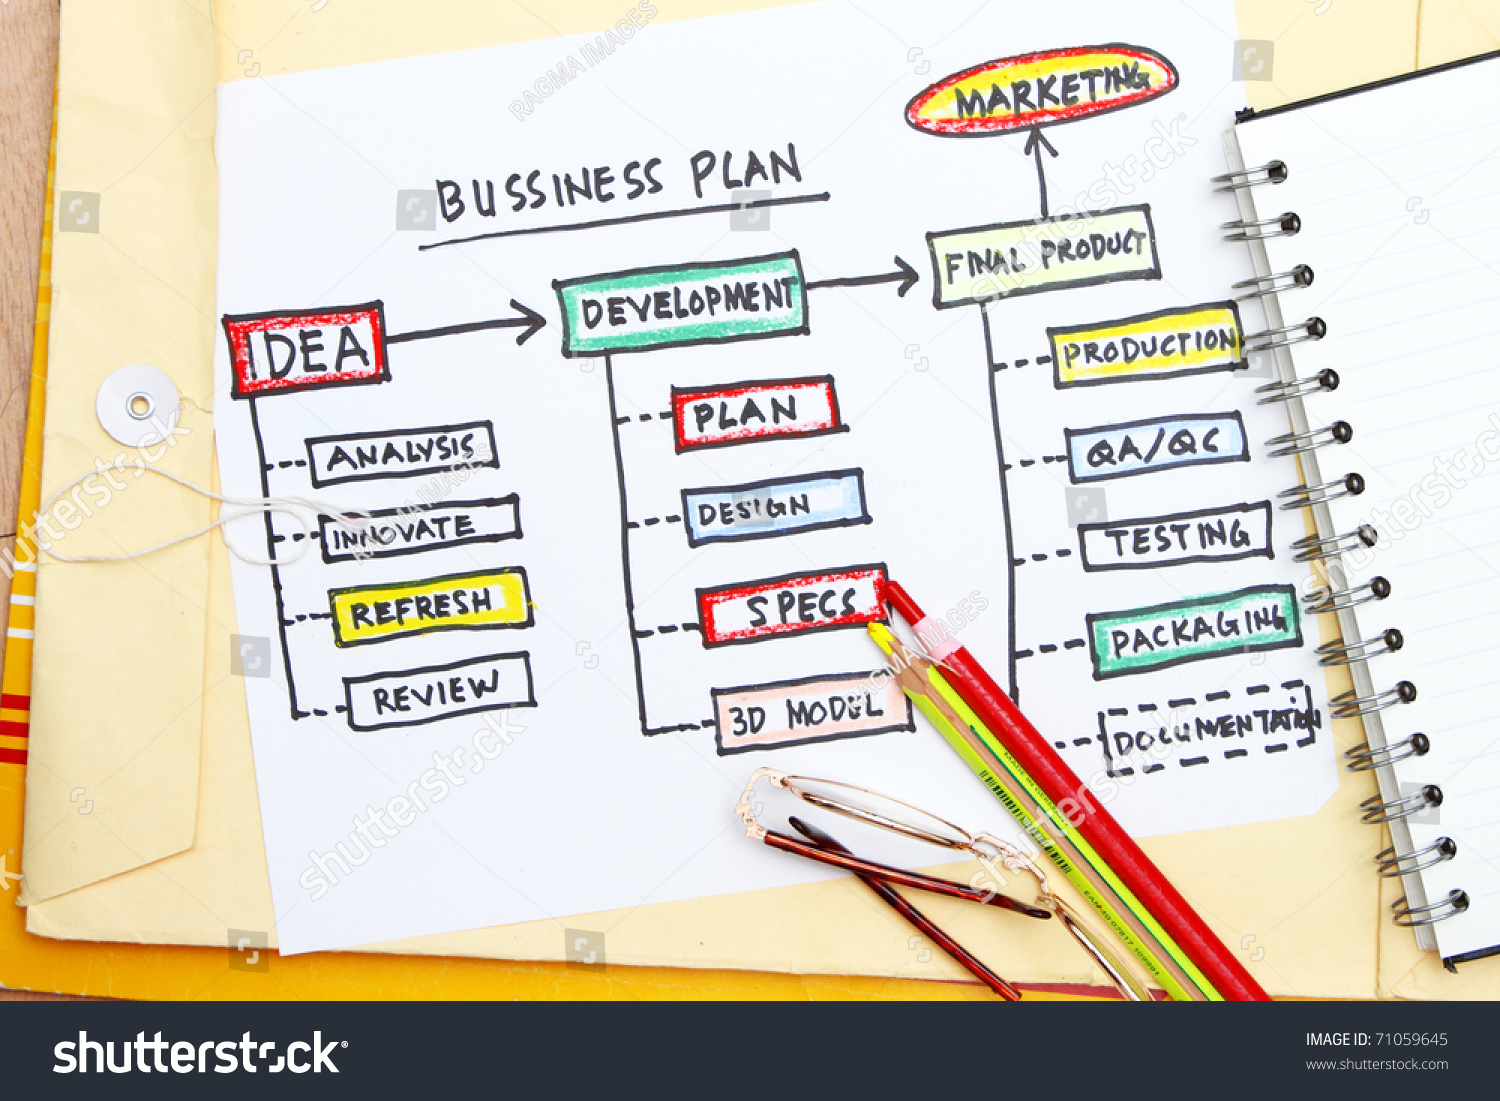 Production process of business plan